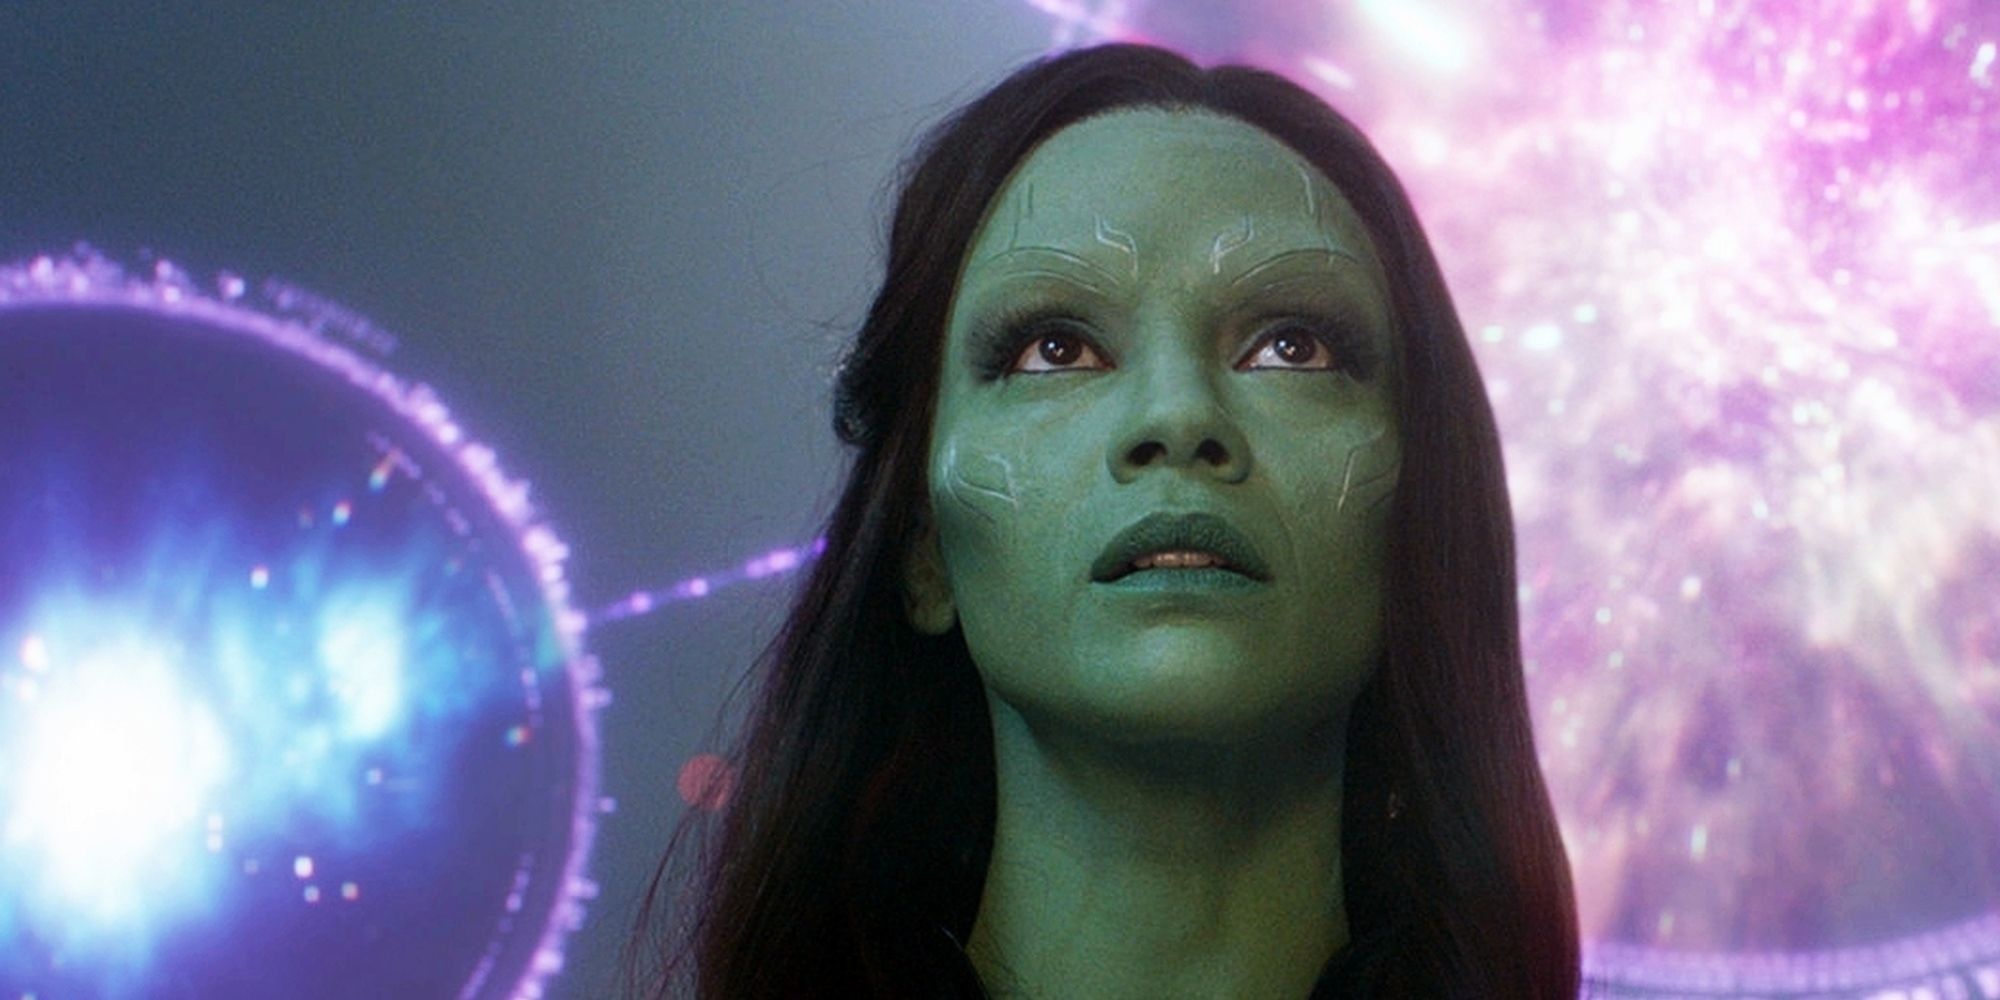 Zoe Saldana as Gamora in front of a beautiful cosmic event in Guardians of the Galaxy.